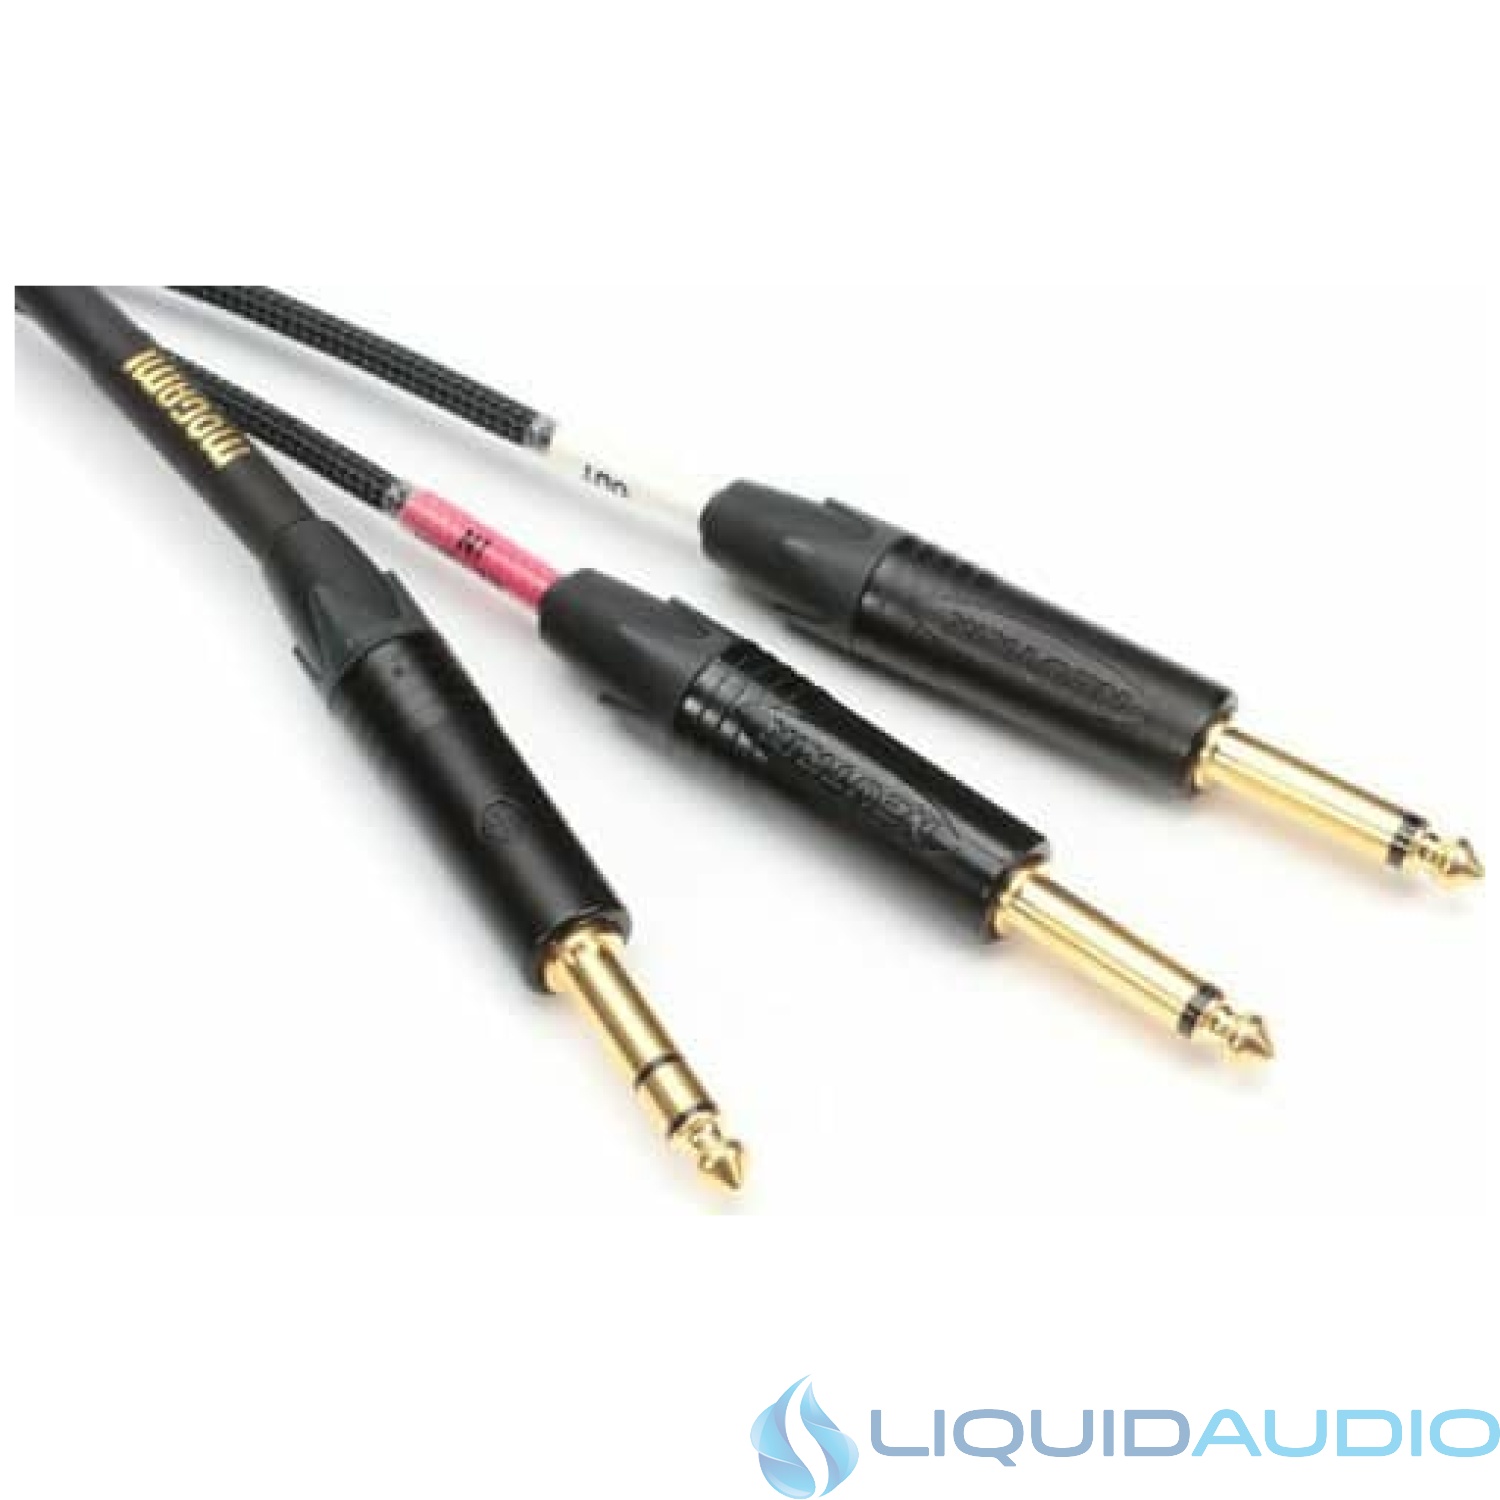 Mogami Gold Insert TS 12 12-foot audio insert Y-cable with 1/4" TRS and dual 1/4" TS connectors.